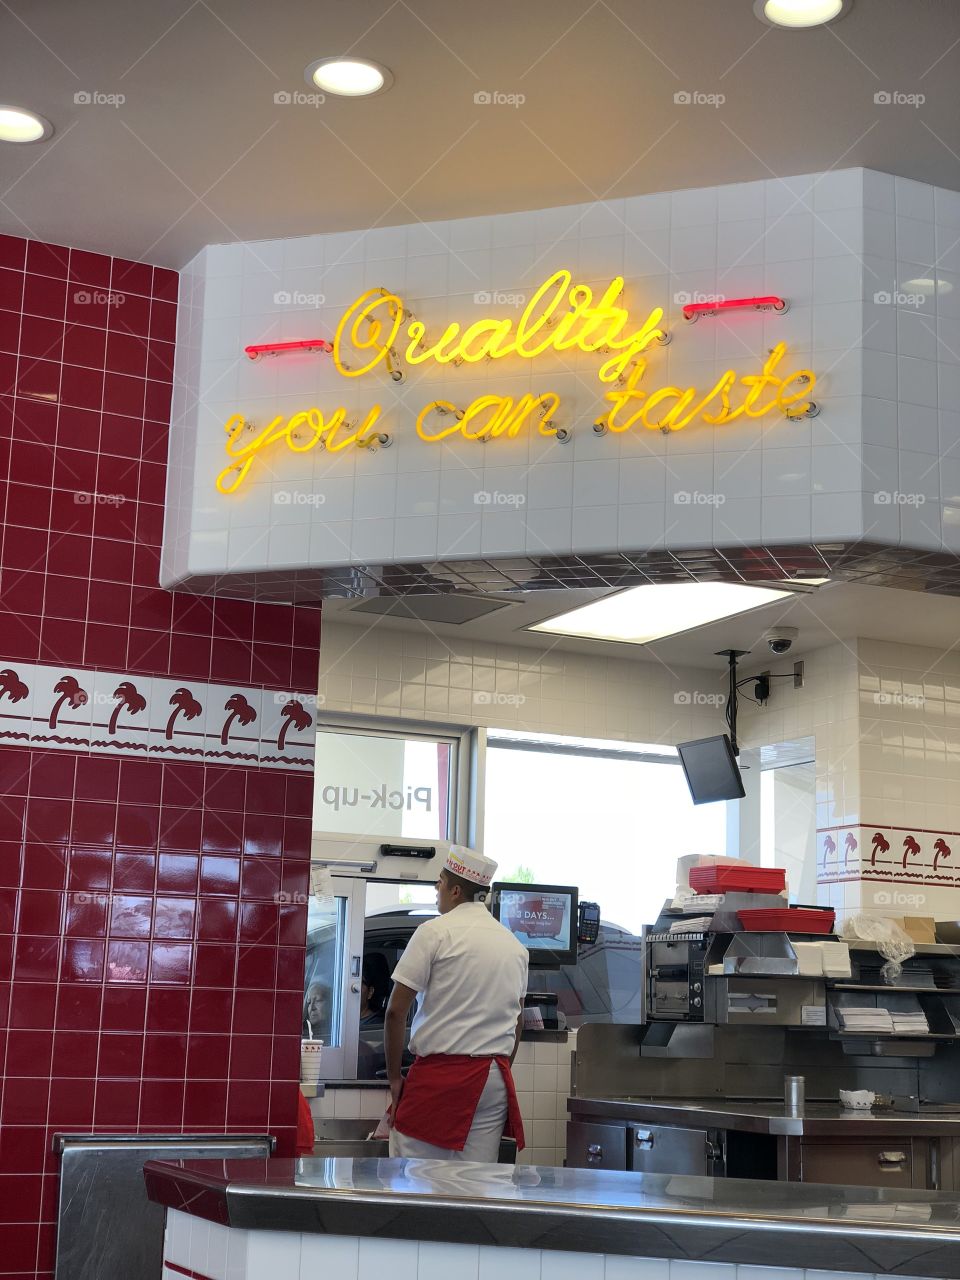 Quality you can taste